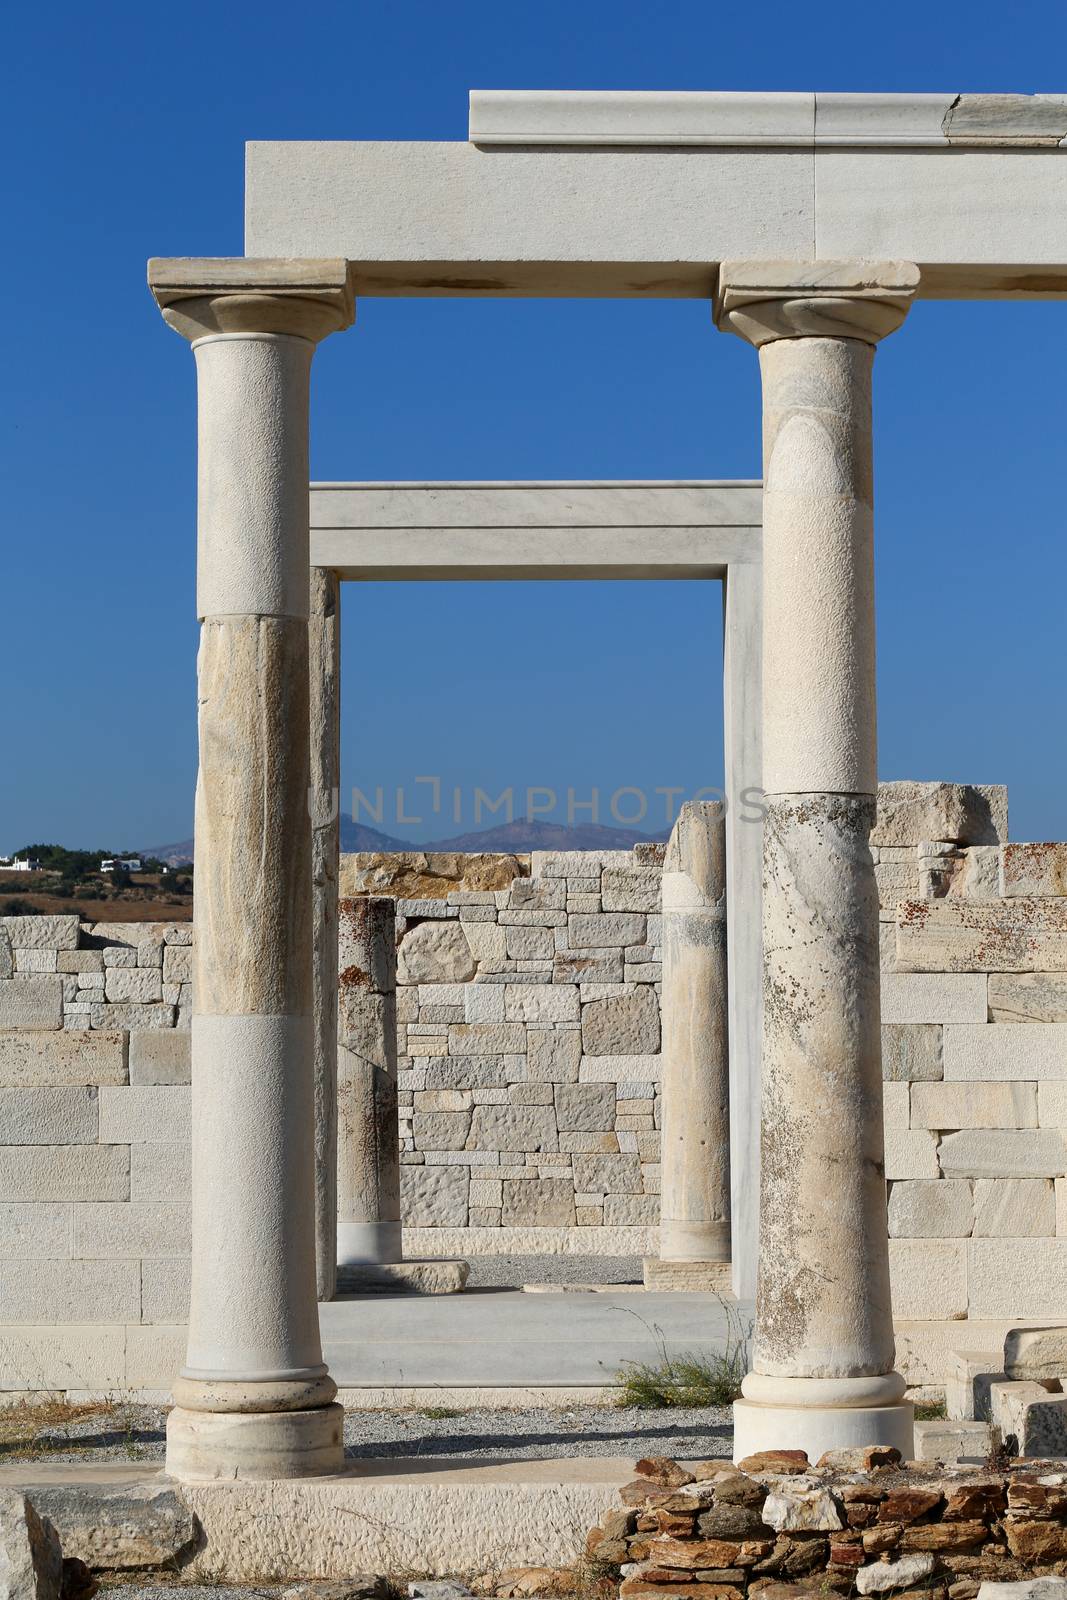 Temple of Demeter at the Naxos island in Greece